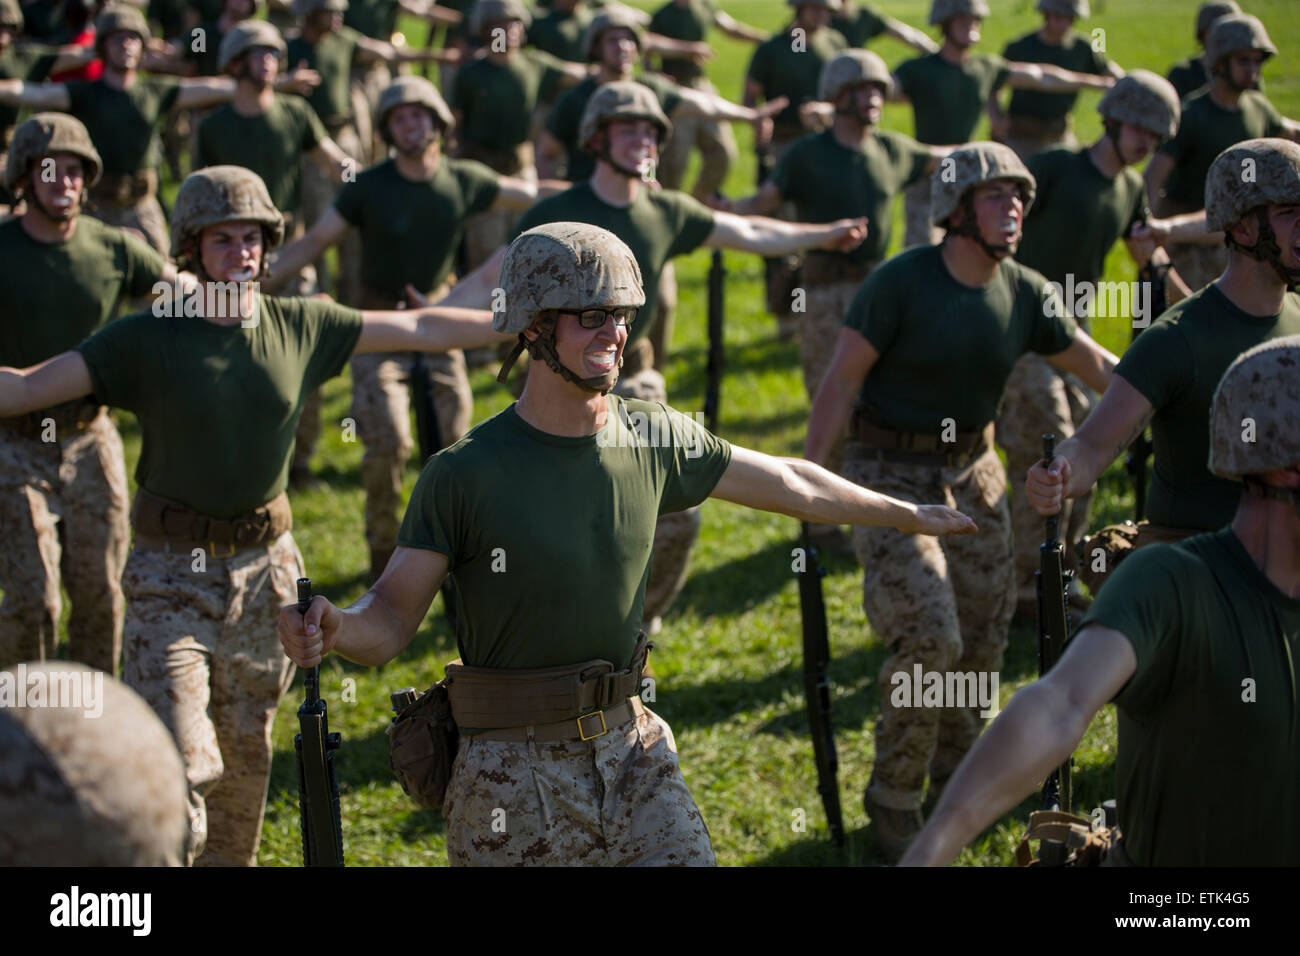 A U.S. Marine recruits during martial arts training at Marine Corps Recruit Depot boot camp June 11, 2015 in Parris Island, South Carolina. Stock Photo